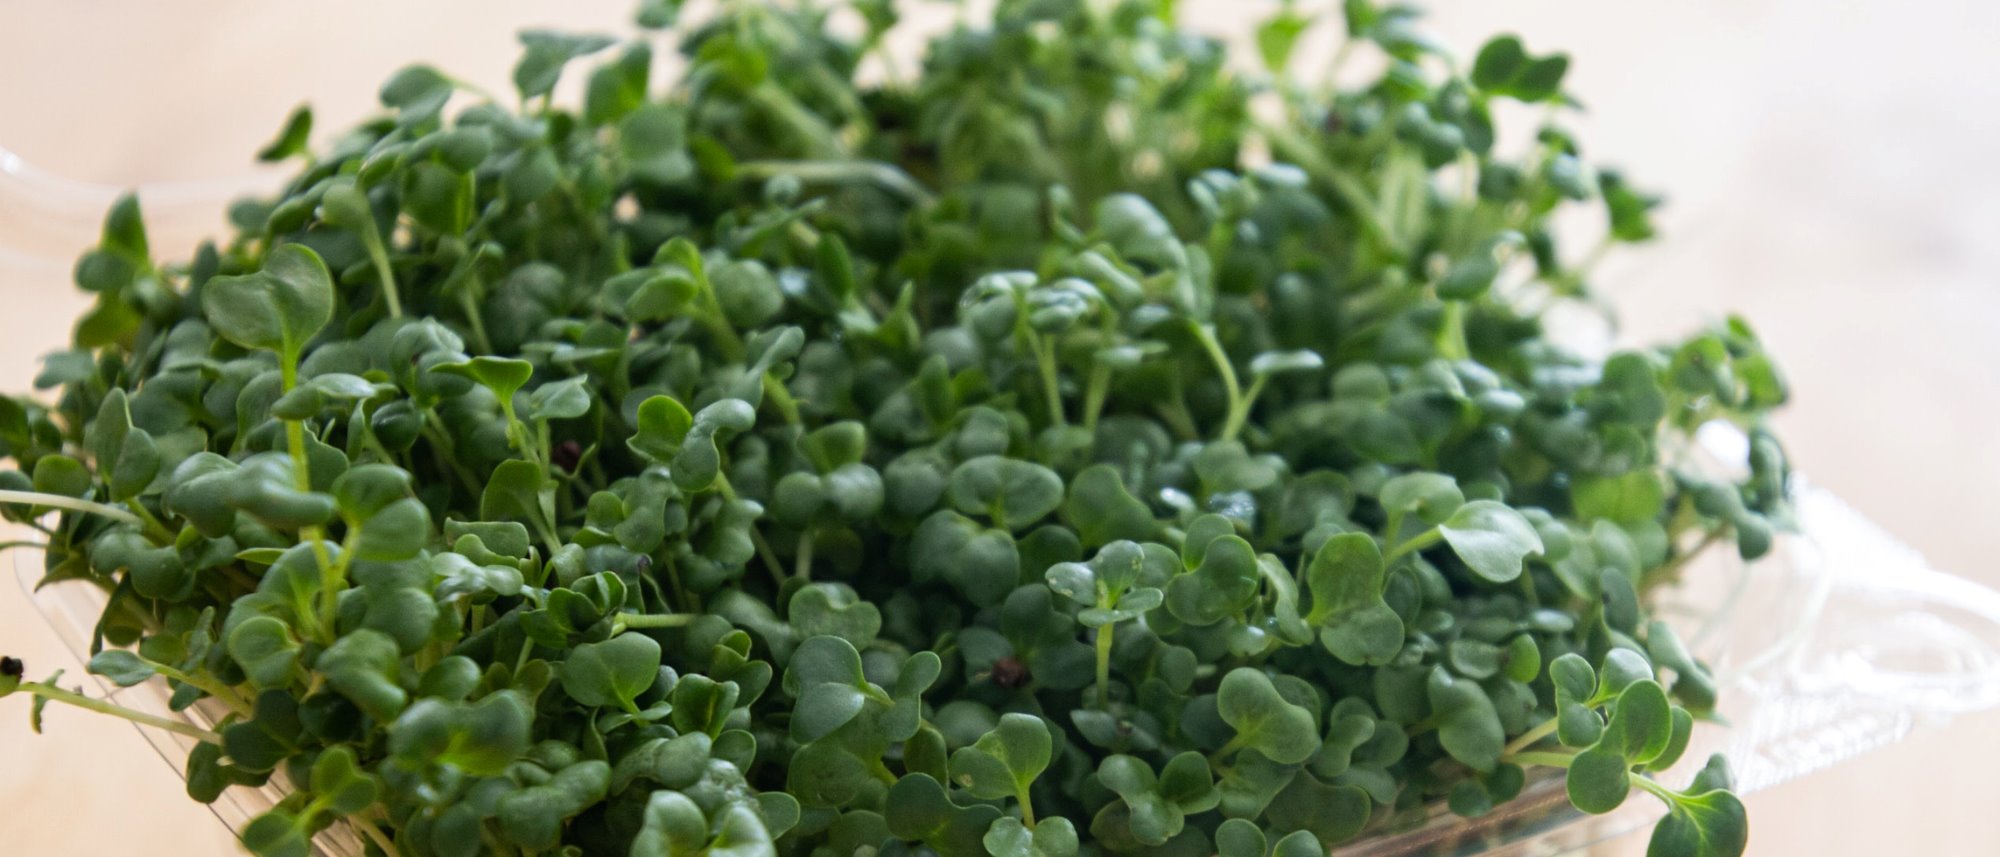 Grow your own microgreens with mild taste and ultimate nutrition